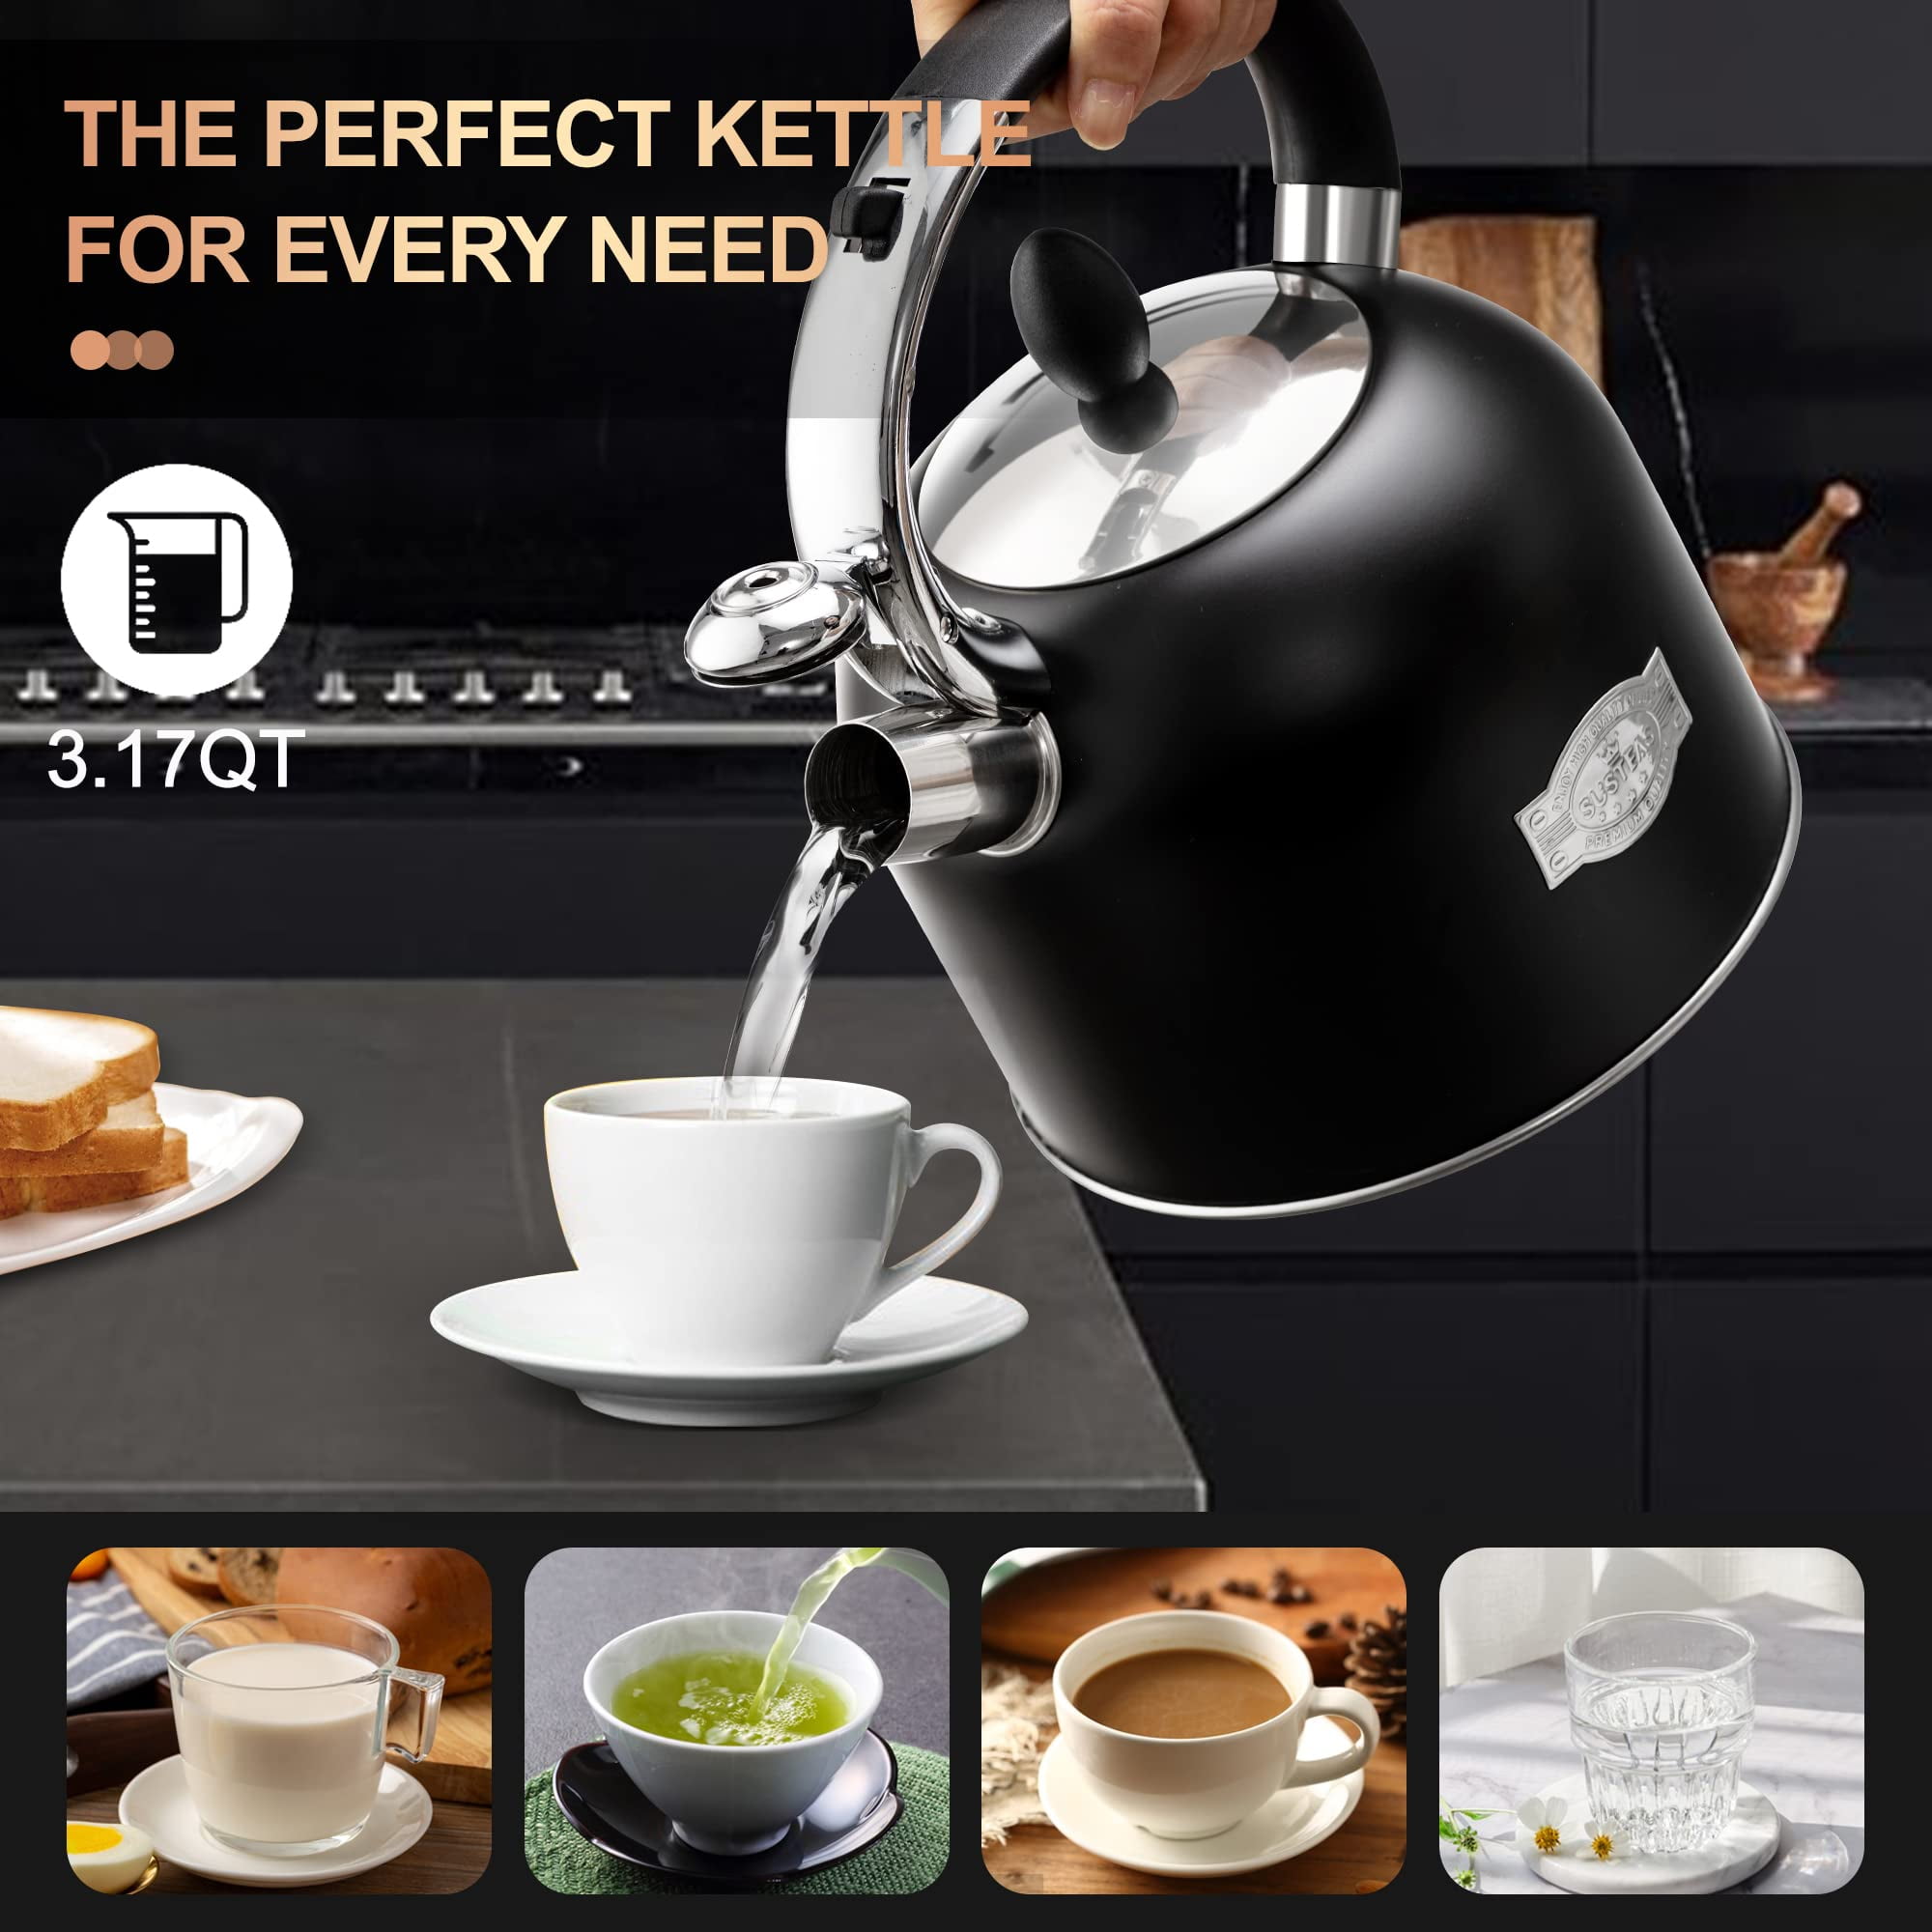  SUSTEAS Stove Top Whistling Tea Kettle-Surgical Stainless Steel Teakettle  Teapot with Cool Touch Ergonomic Handle,1 Free Silicone Pinch Mitt  Included,2.64 Quart(SILVER): Home & Kitchen